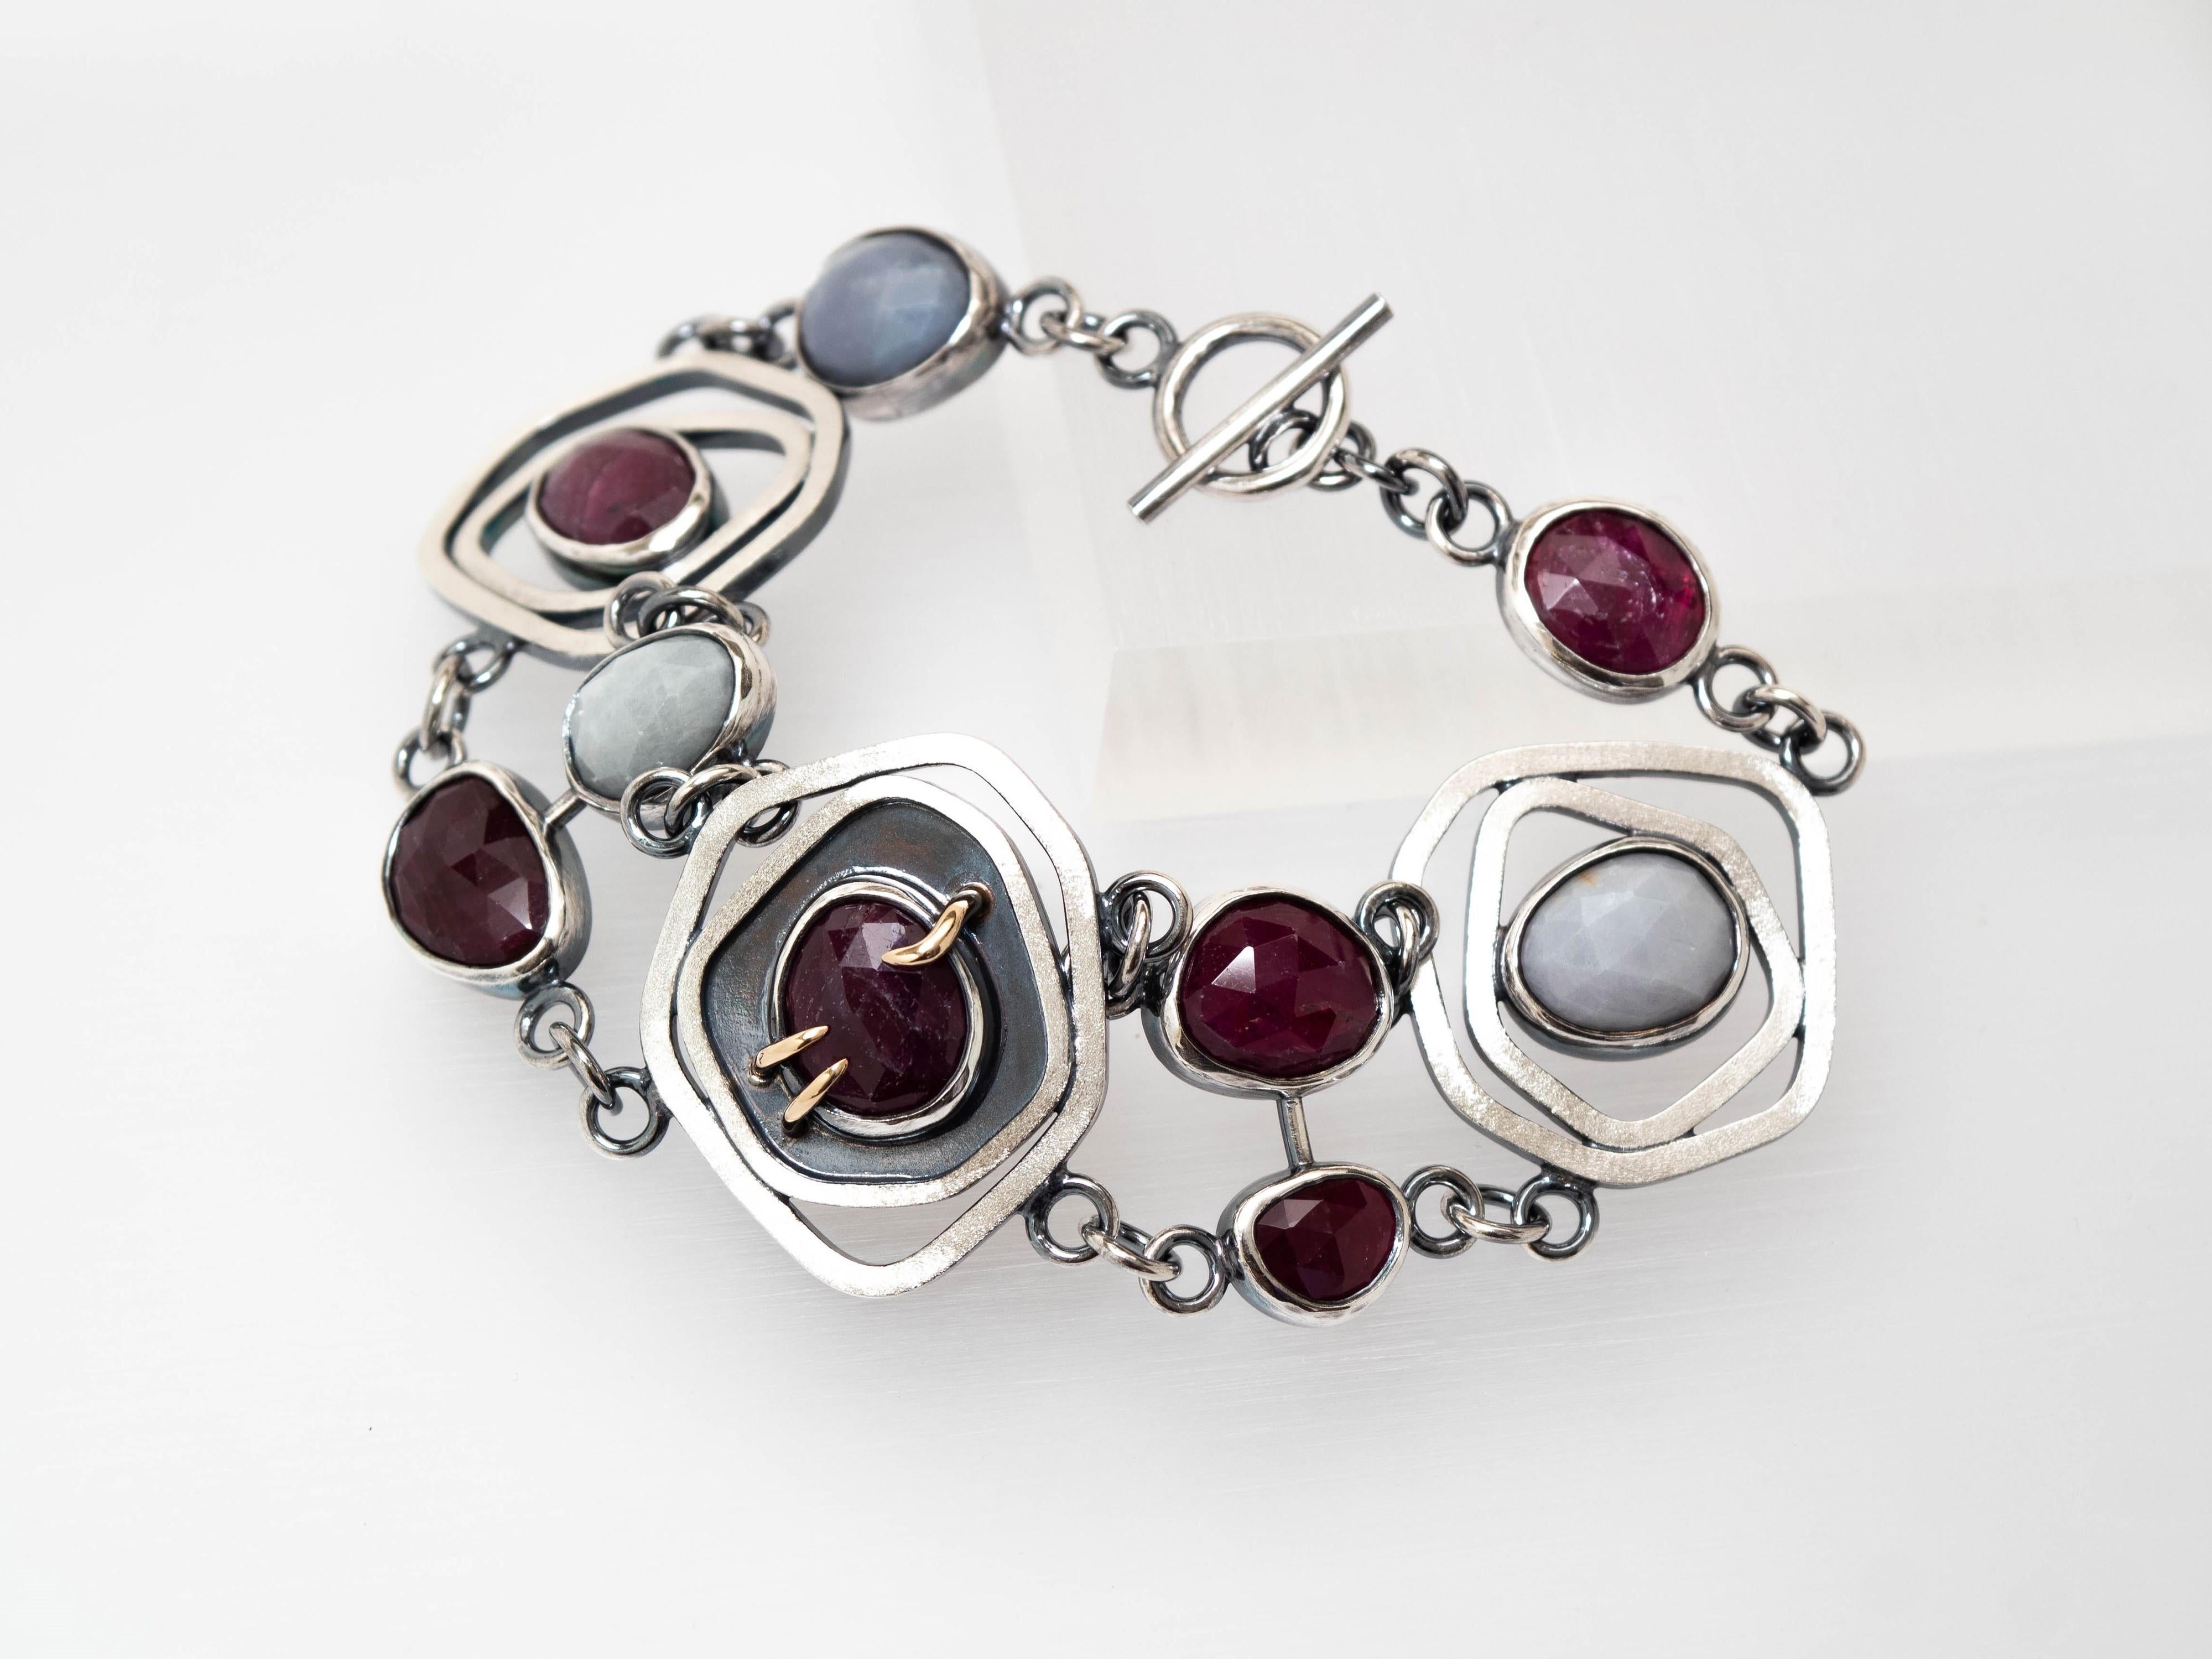 Priestess Ruby Sapphire 14K Sterling Silver Bracelet by TIN HAUS.

The essence of the Priestess Bracelet was inspired by the High Priestess tarot card. The High Priestess is a card of mystery, divinity, contemplation, and stillness that suggests